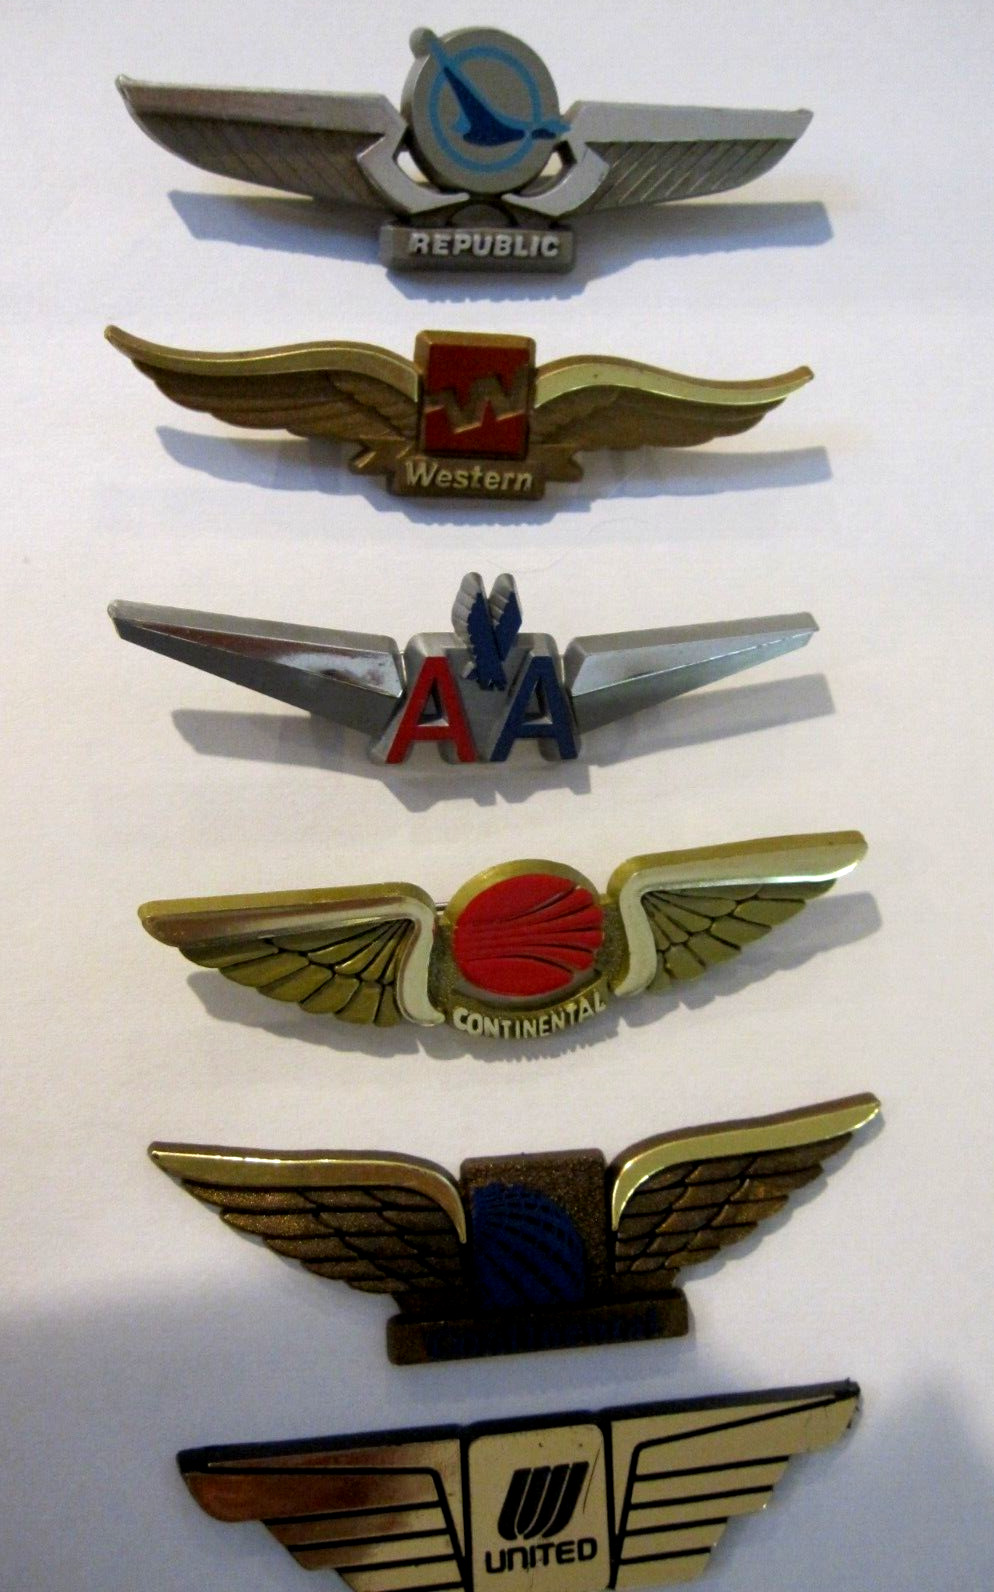 6-Vtg Jr Pilot Wings REPUBLIC, WESTERN, AMERICAN AIRLINES, 2-CONTINENTAL, UNITED